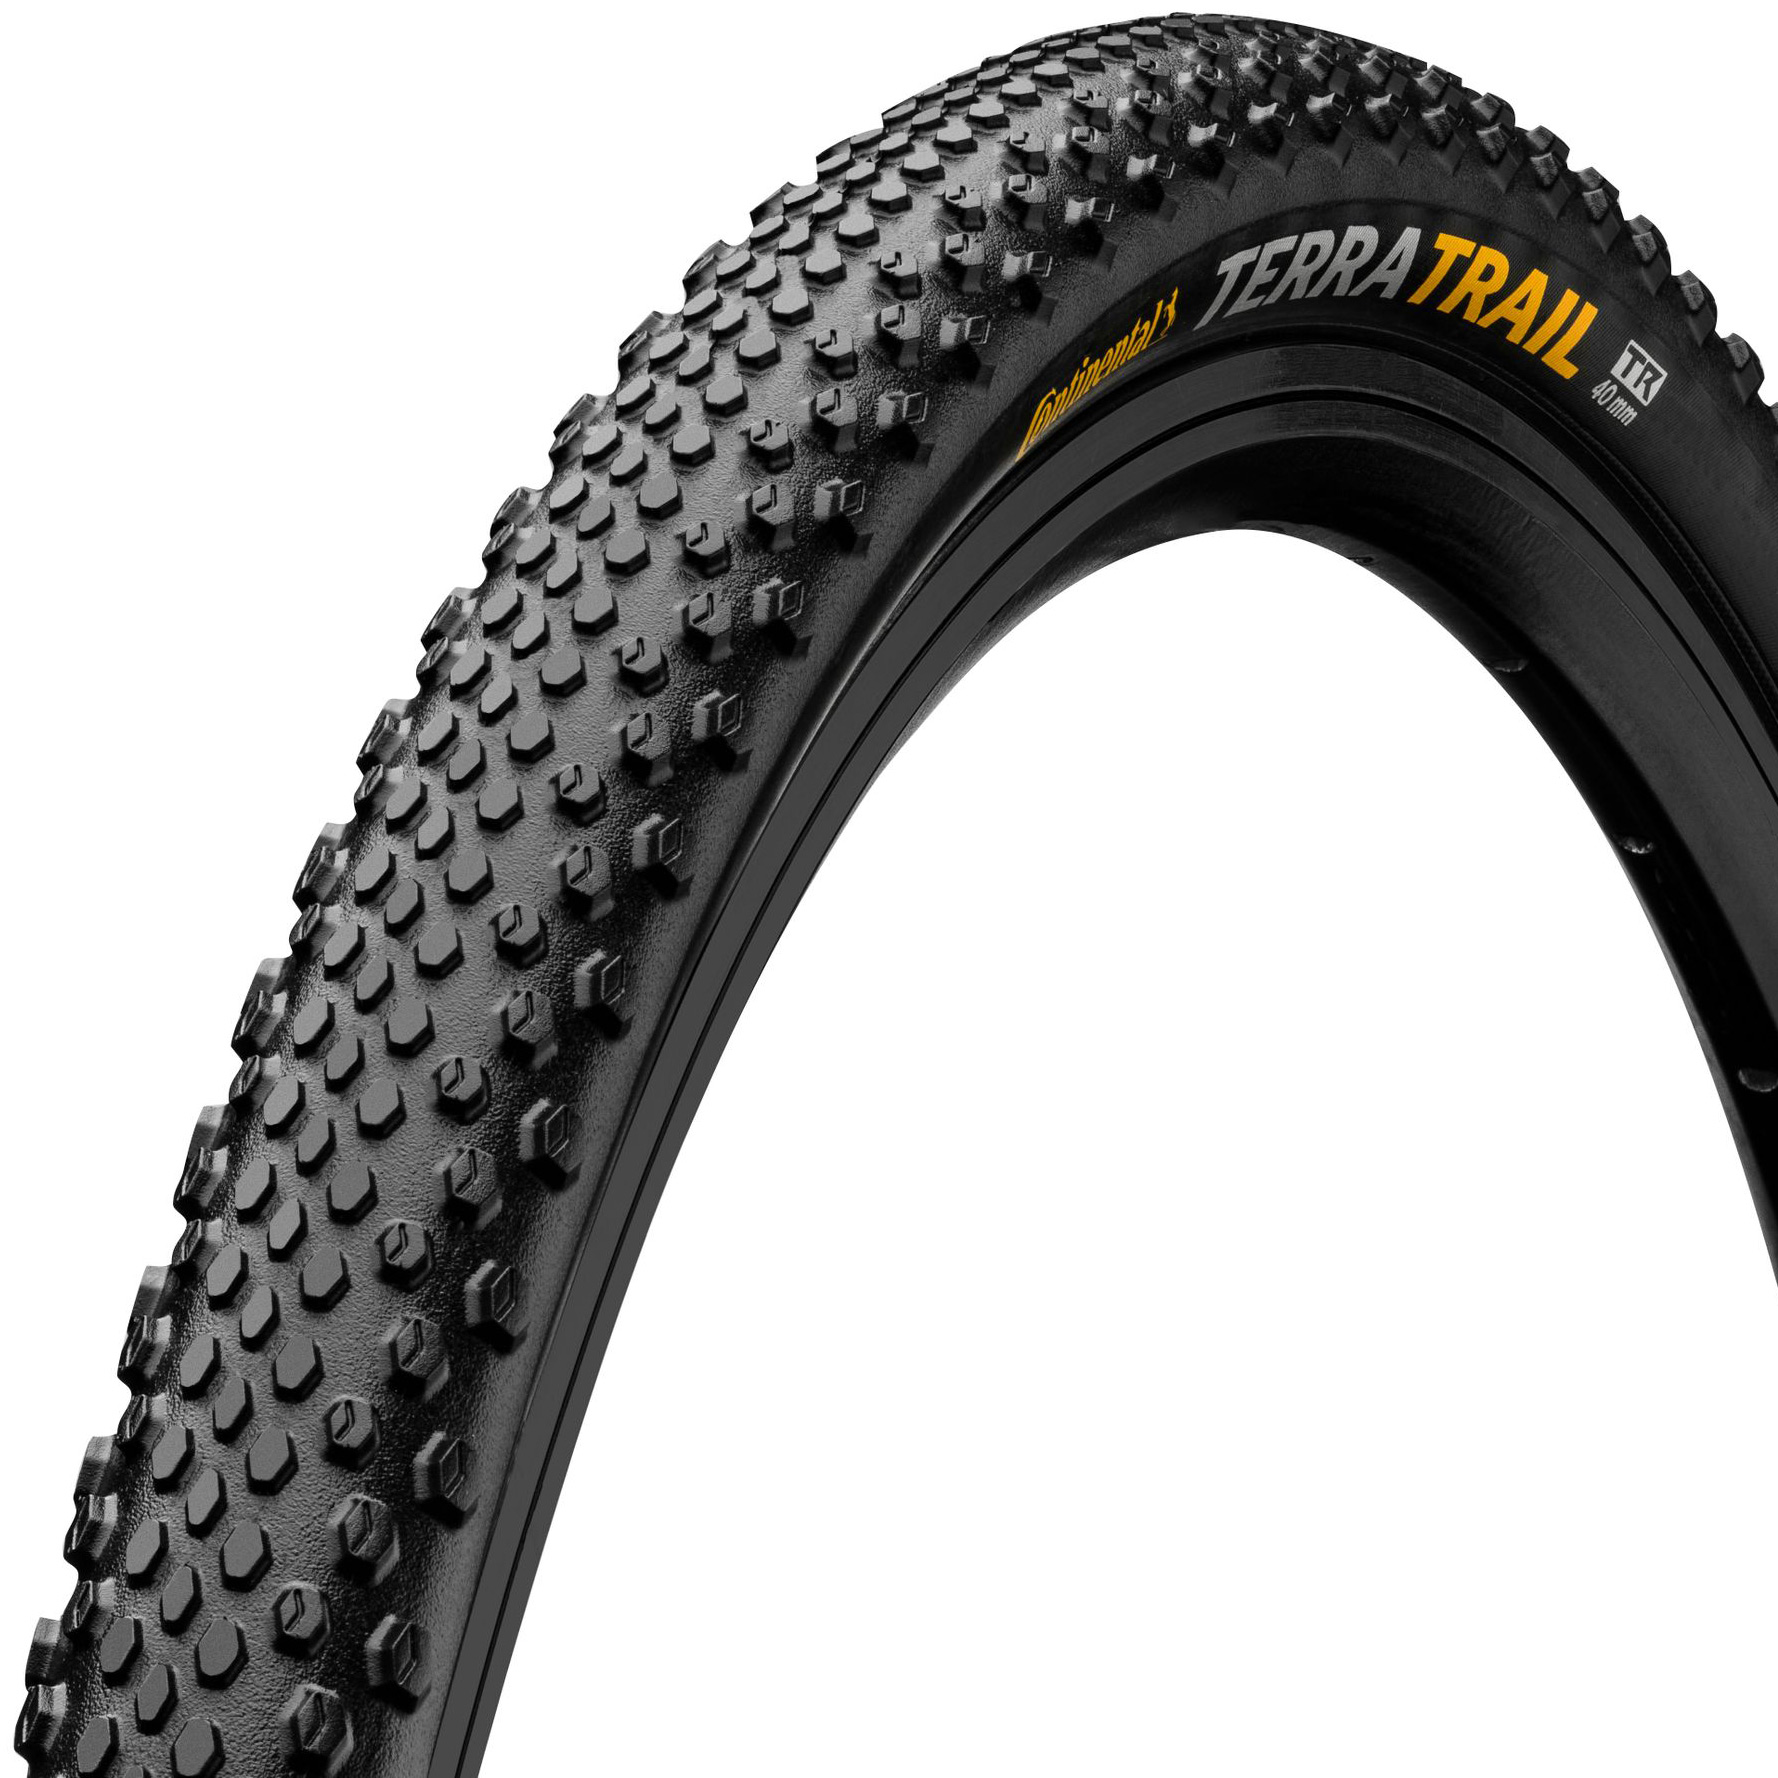 Image of Continental Terra Trail Folding Tire - Gravel | ProTection - 40-622 | black